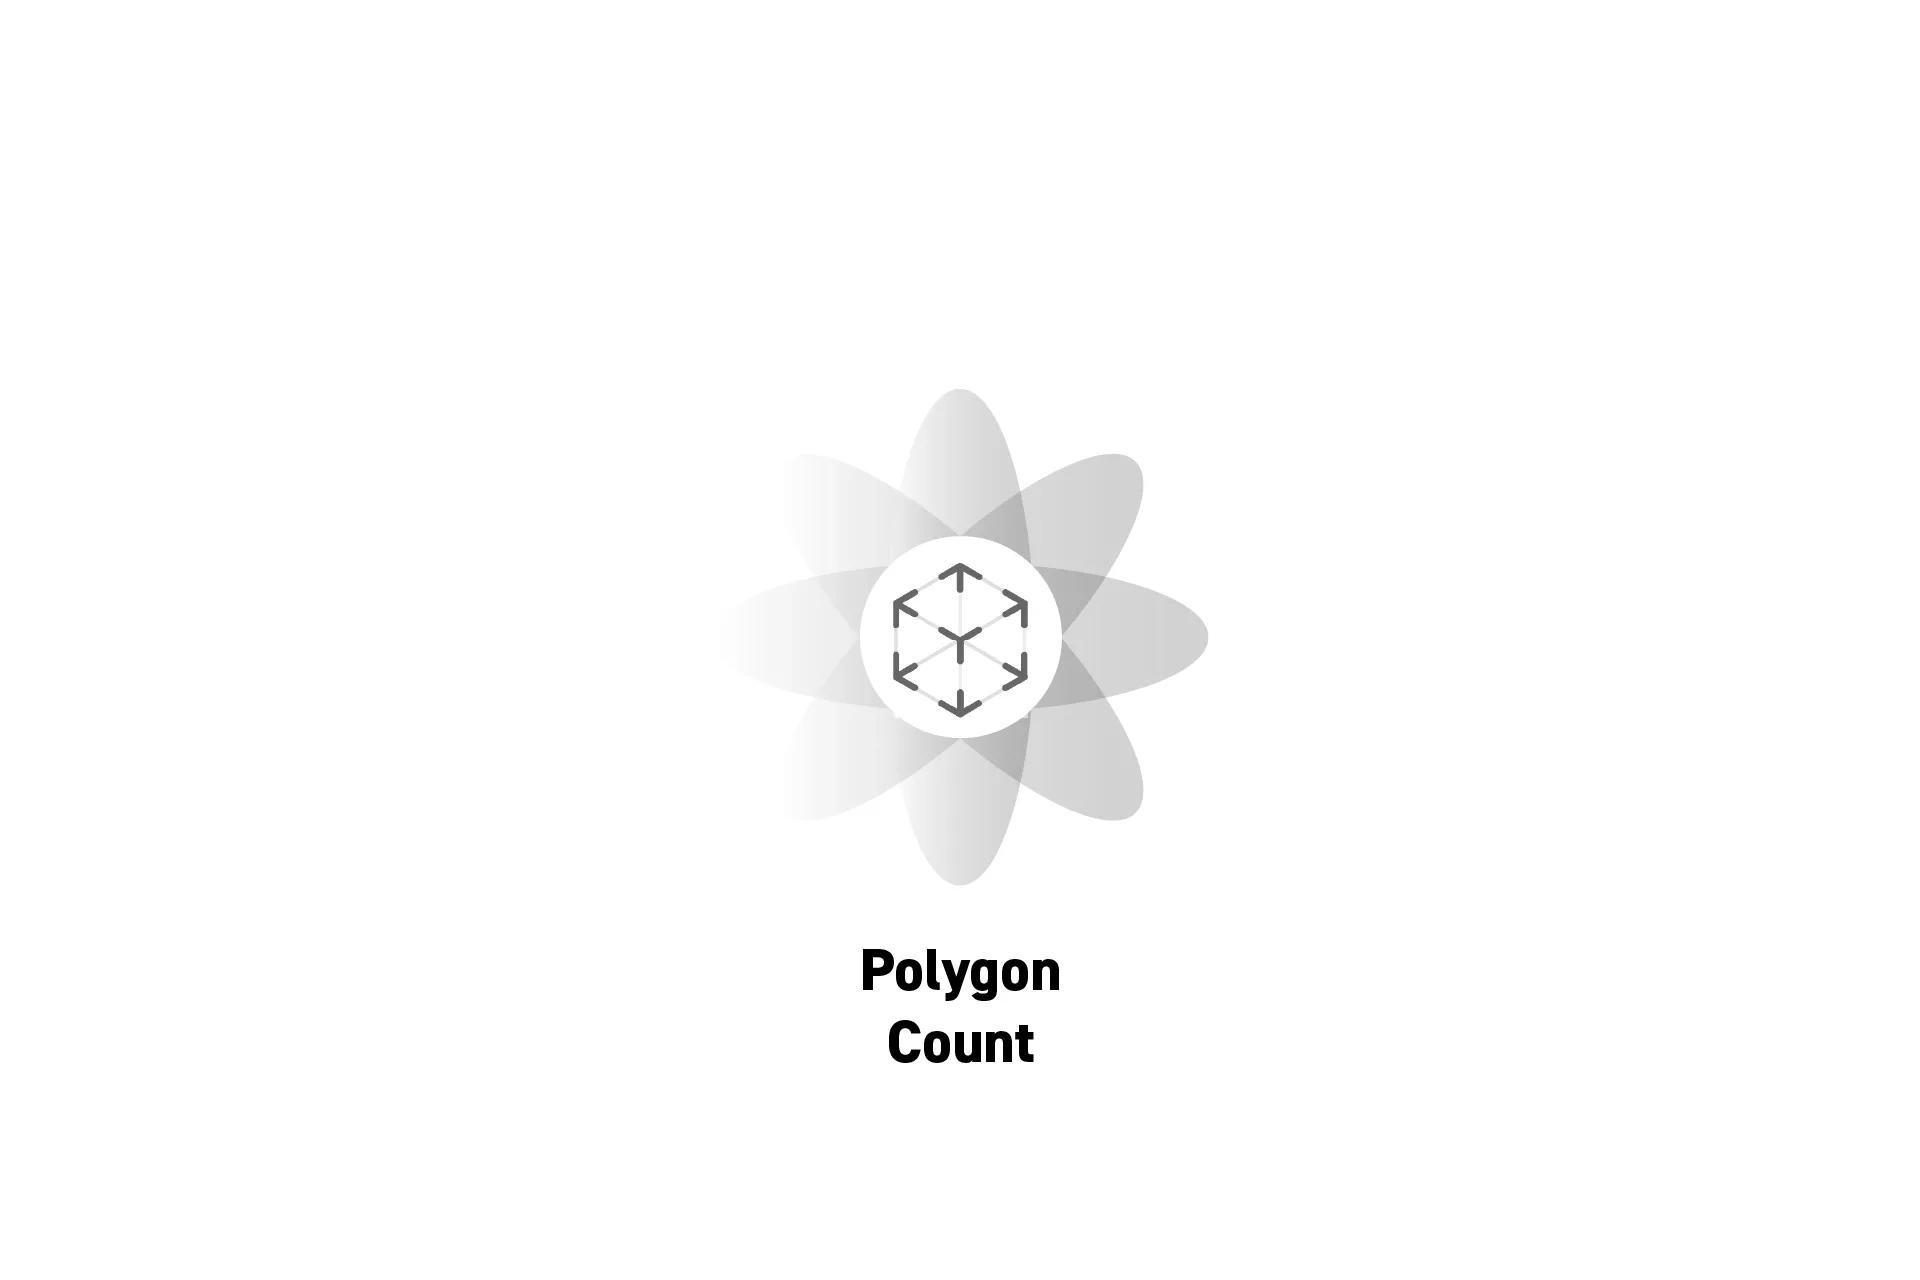 A flower that represents spatial computing with the text "Polygon Count" beneath it.